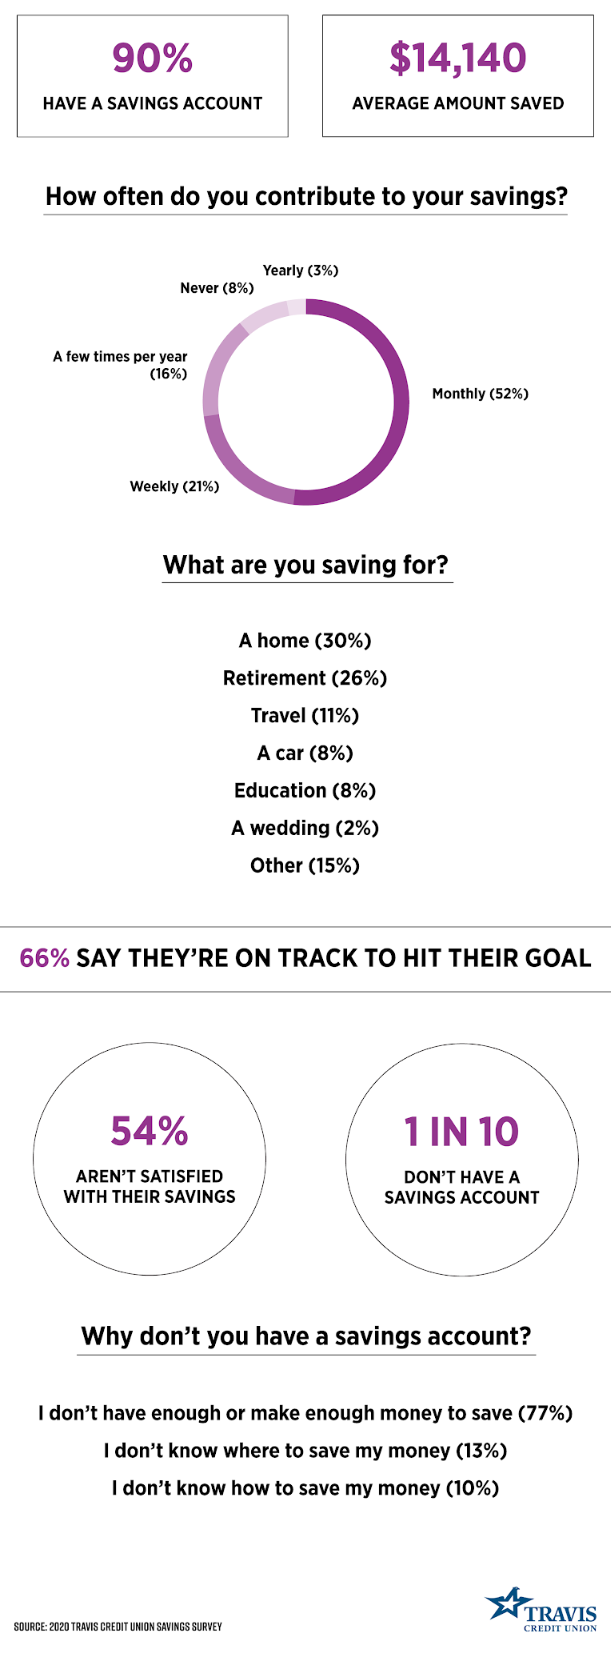 90% have a savings account. $14,140 average amount saved.

How often do you contribute to your savings?
Monthly (52%). Weekly (21%). A few times per year (16%). Never (8%). Yearly (3%). 

What are you saving for? 
A home (30%). Retirement (26%). Travel (11%). A car (8%). Education (8%). A wedding (2%). Other (15%). 

66% say they're on track to hit their goal. 

54% aren't satisfied with their savings. 

1 in 10 don't have a savings account. 

Why don't you have a savings account?
I don't have enough or make enough money to save (77%). 
I don't know where to save my money (13%). 
I don't know how to save my money (10%).